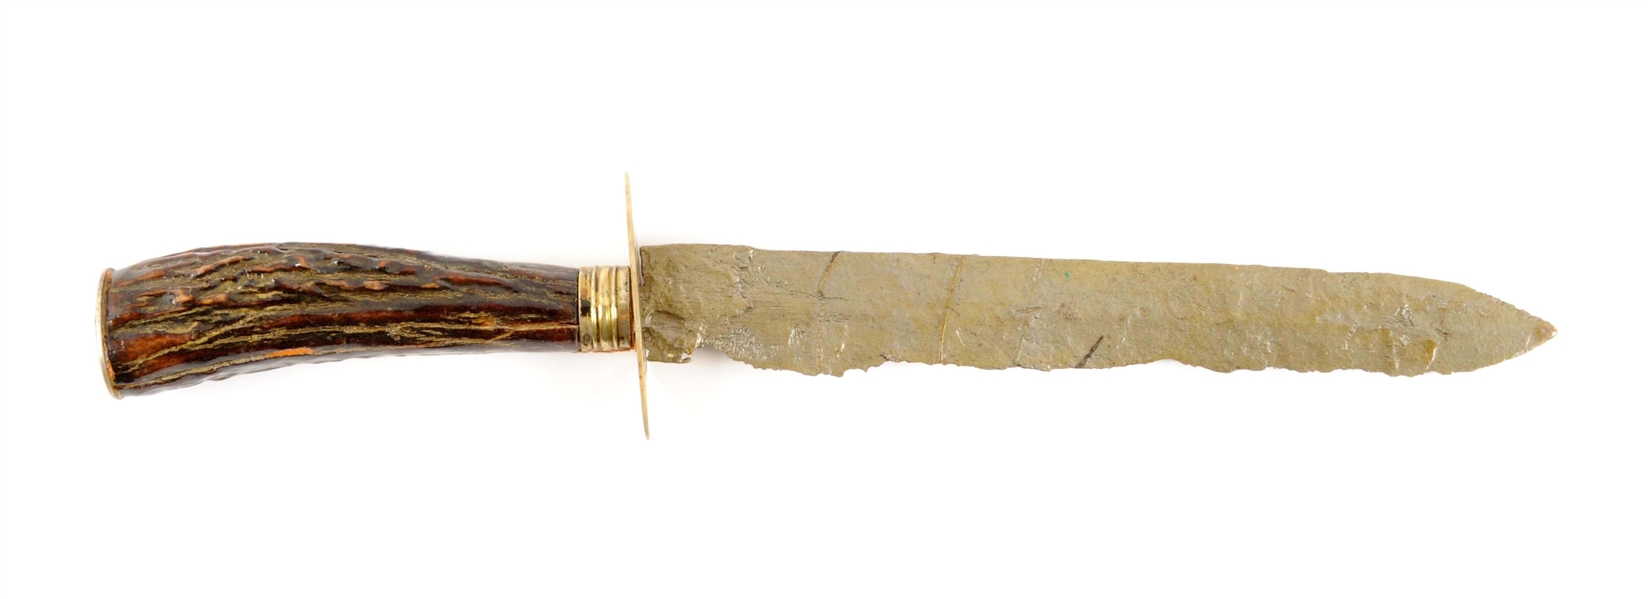 ENGLISH BOWIE KNIFE RECOVERED FROM THE BLOCKADE RUNNER “MODERN GREECE”.